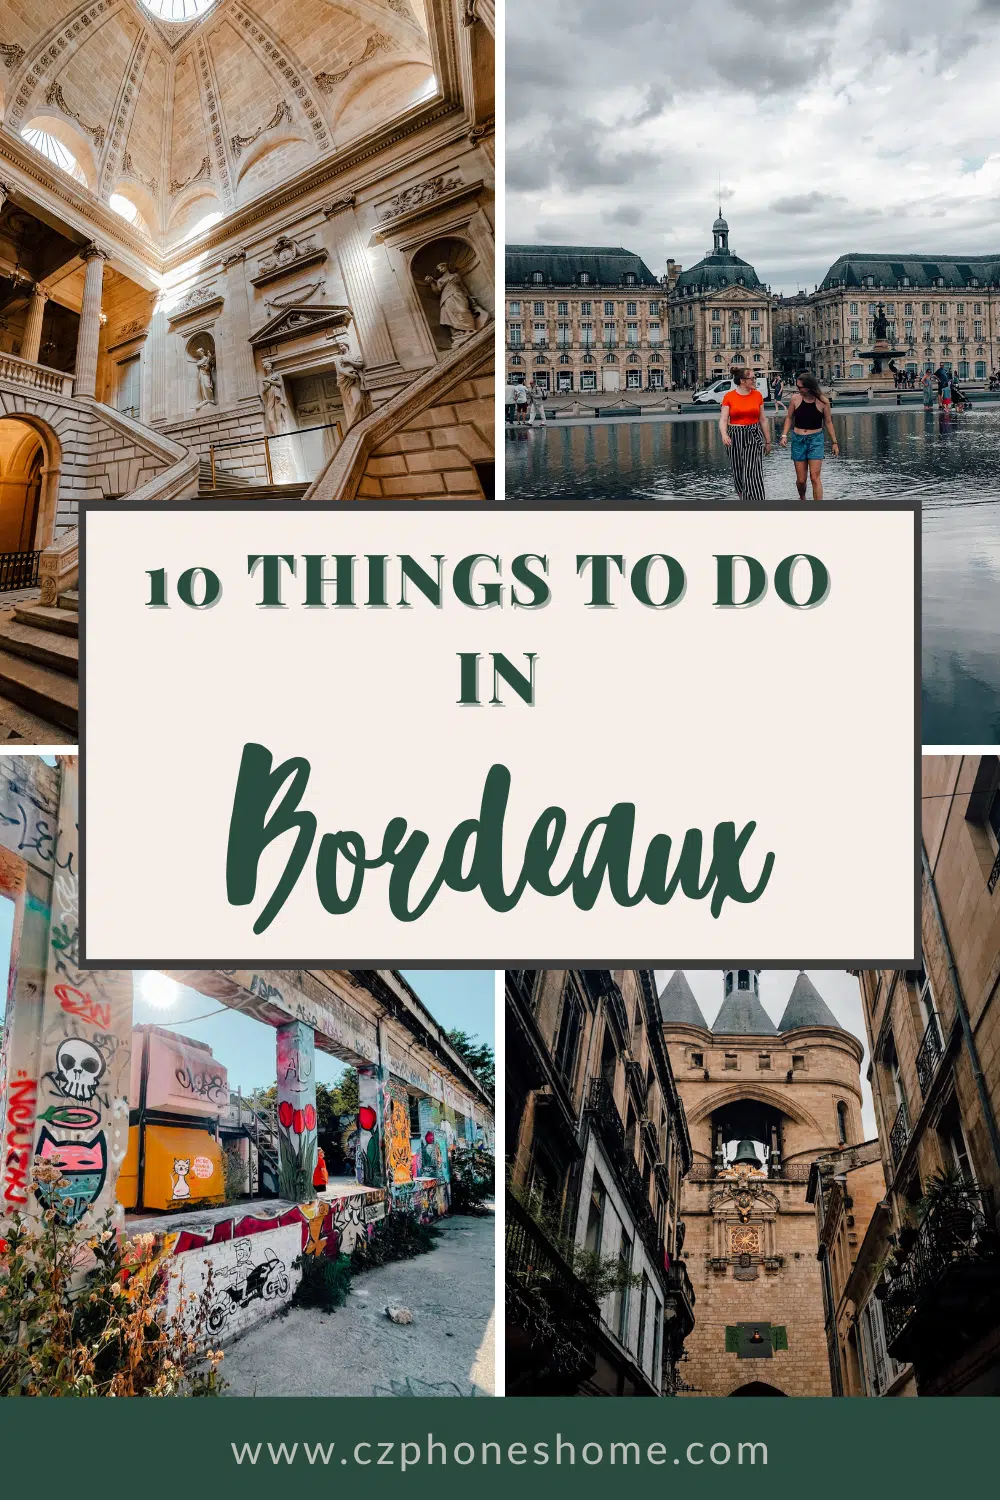 10 things to do in Bordeaux